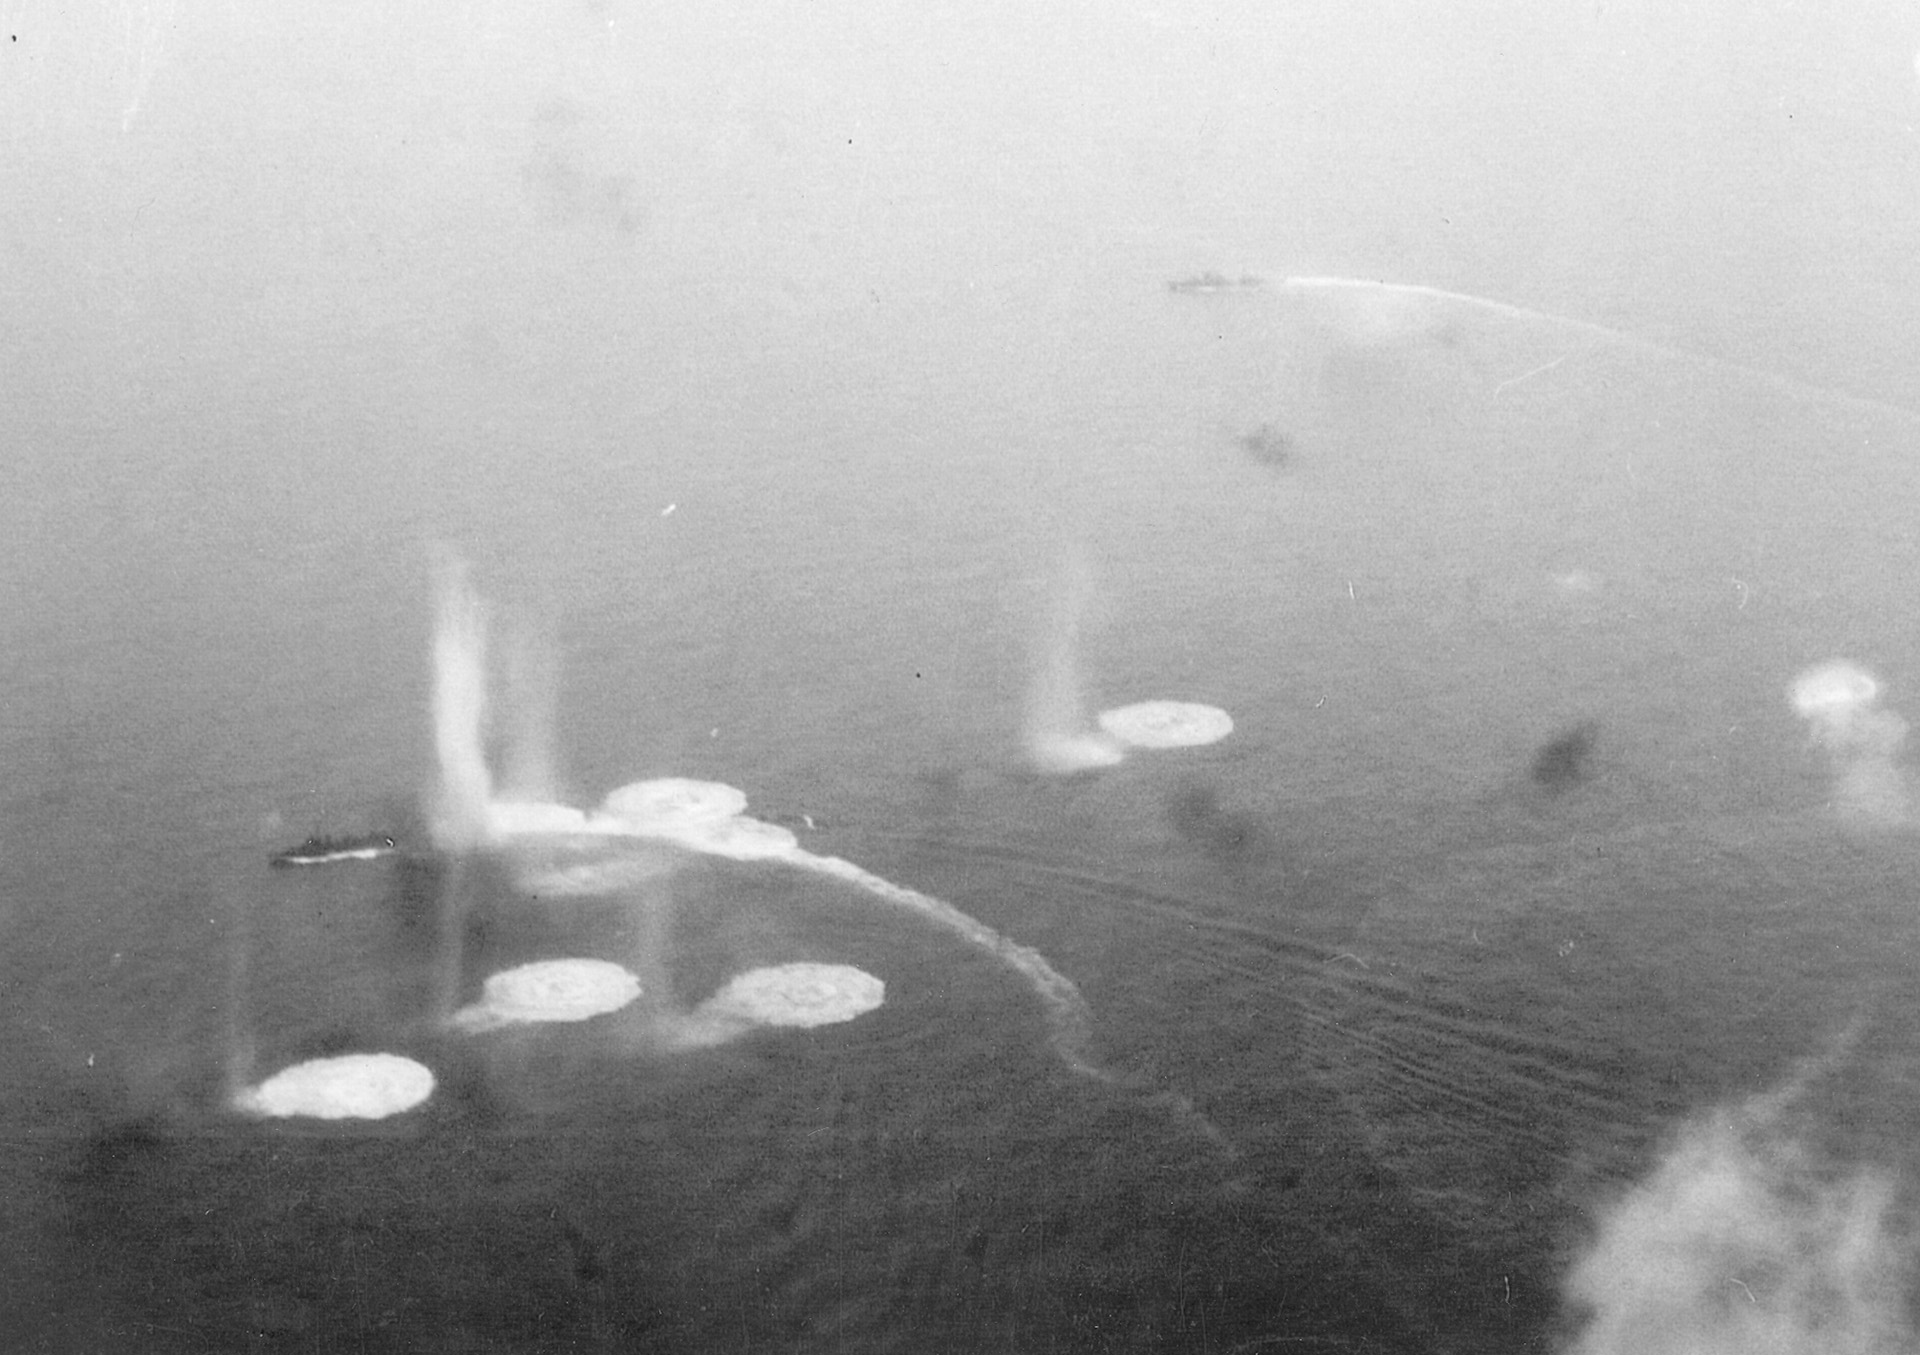 A Japanese destroyer maneuvers violently as American planes unleash their bombs. Another Japanese warship is visible in the distance.